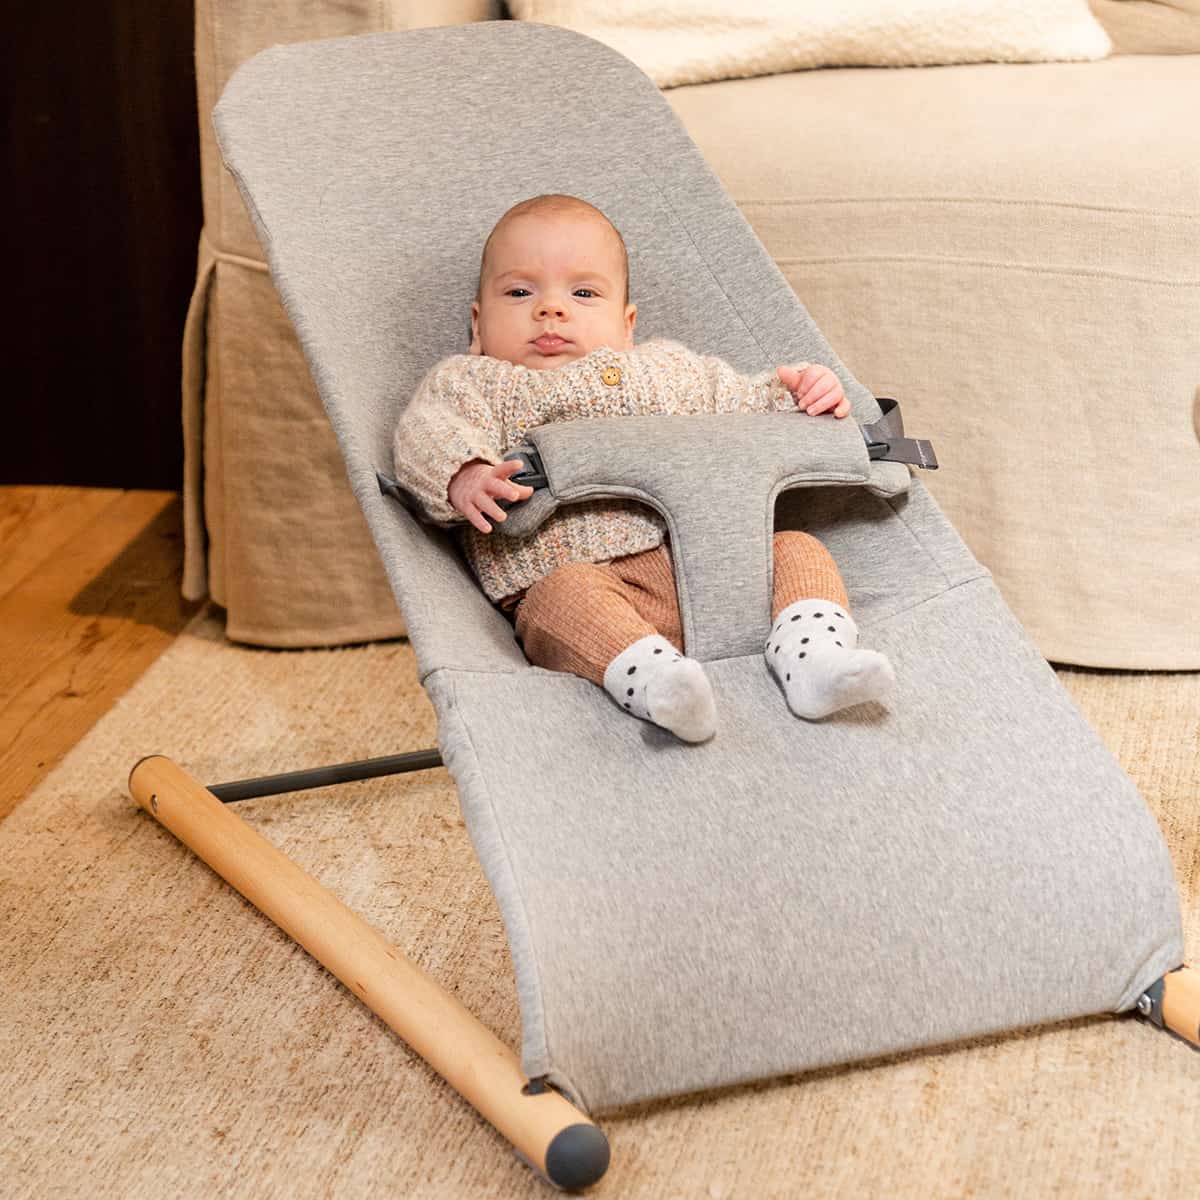 Childhome Bouncer Jersey Grey in Living Room with Baby